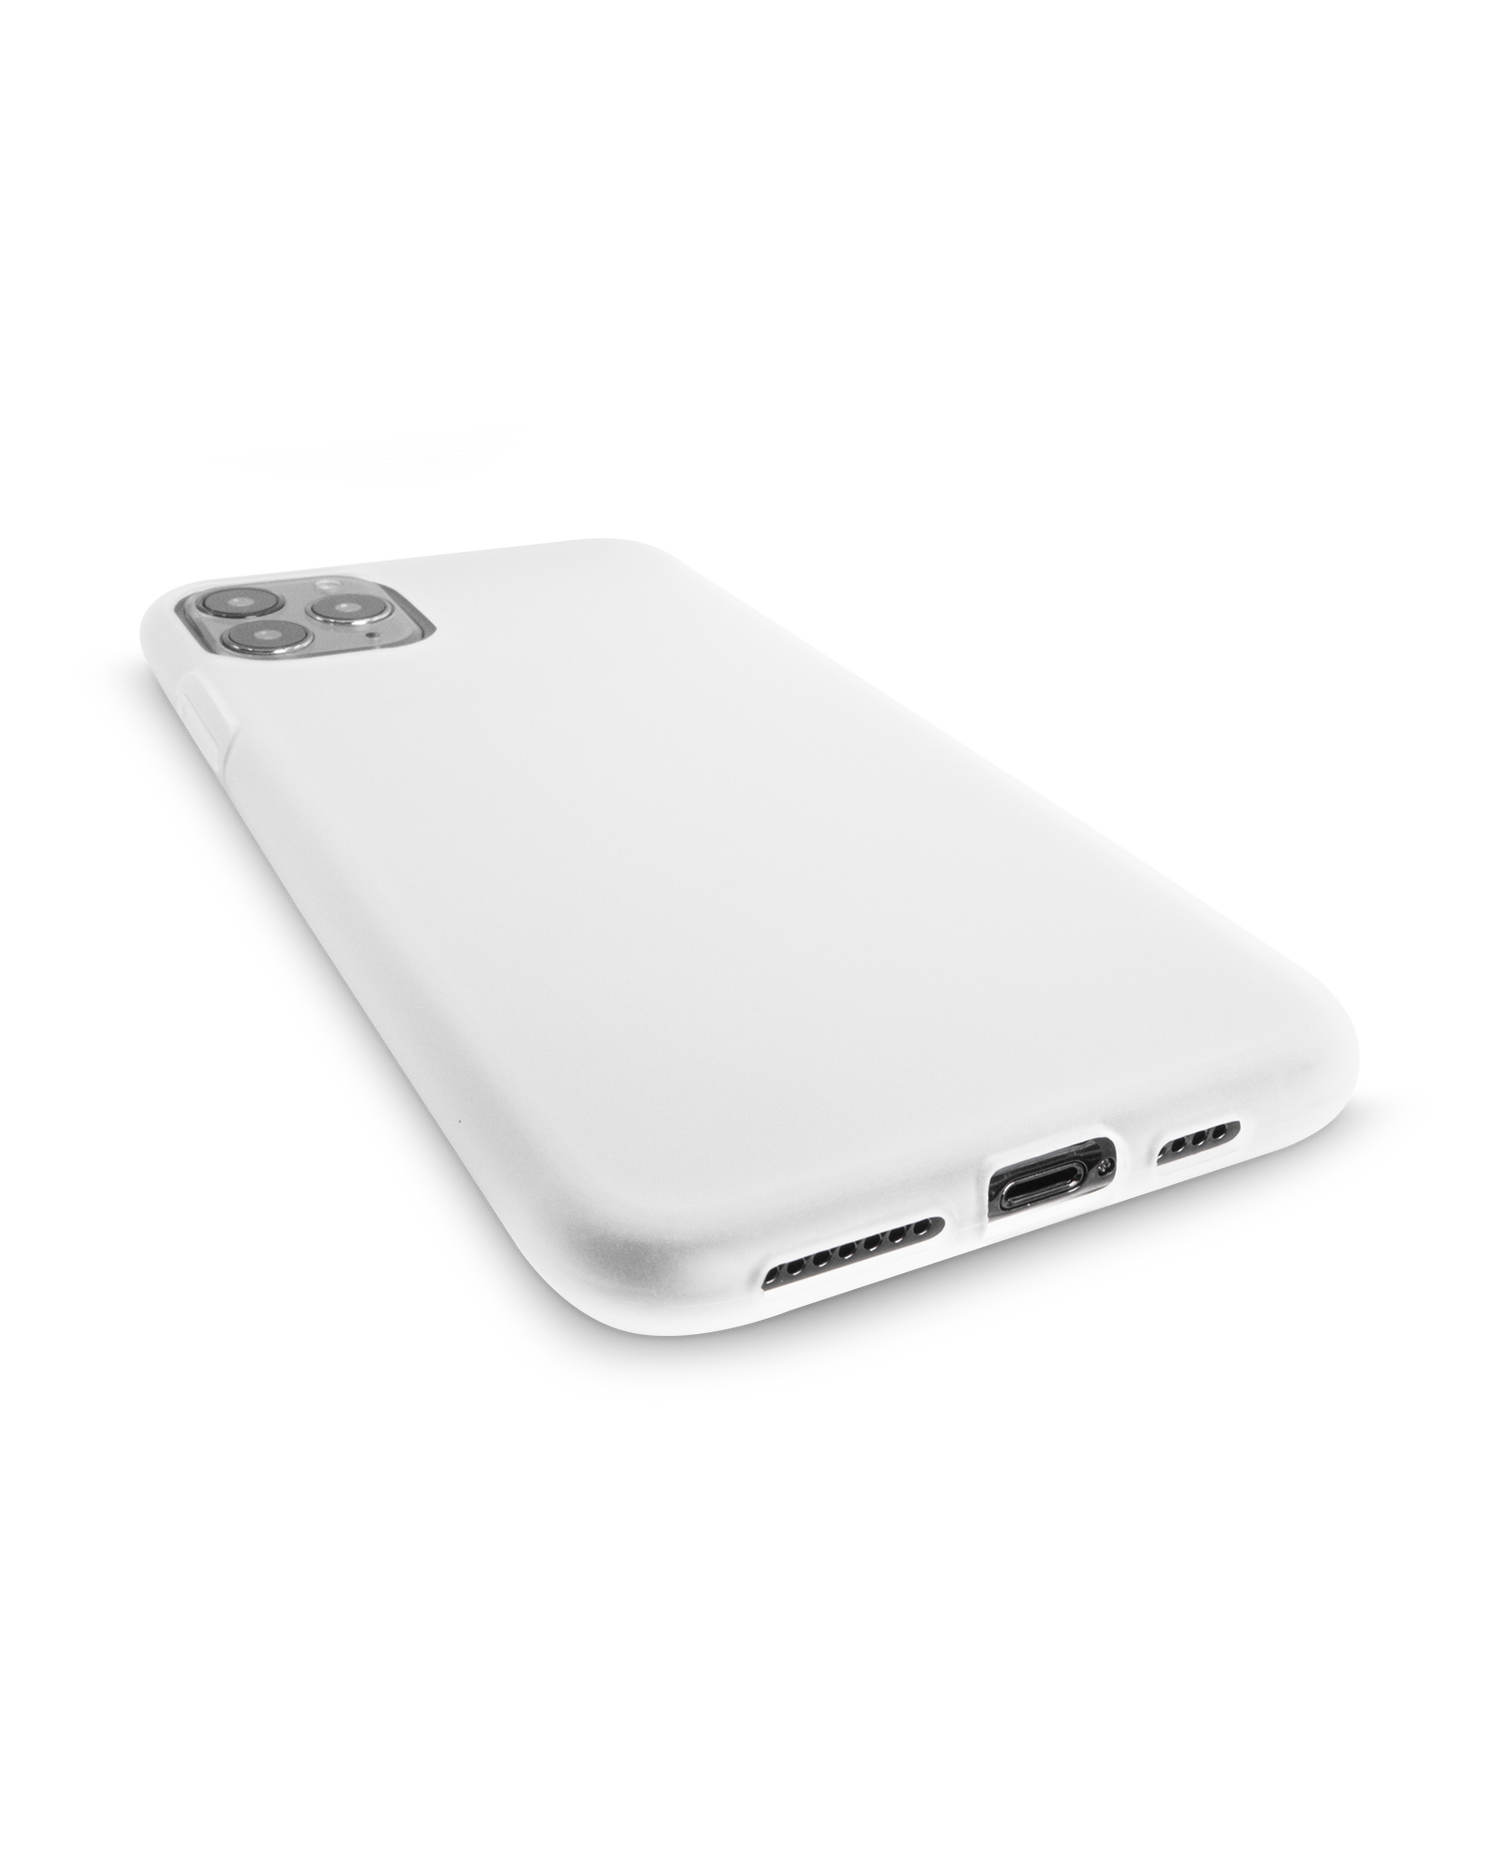 Recycled Silicone Phone Case for iPhone 11 Pro Max: Bottom view